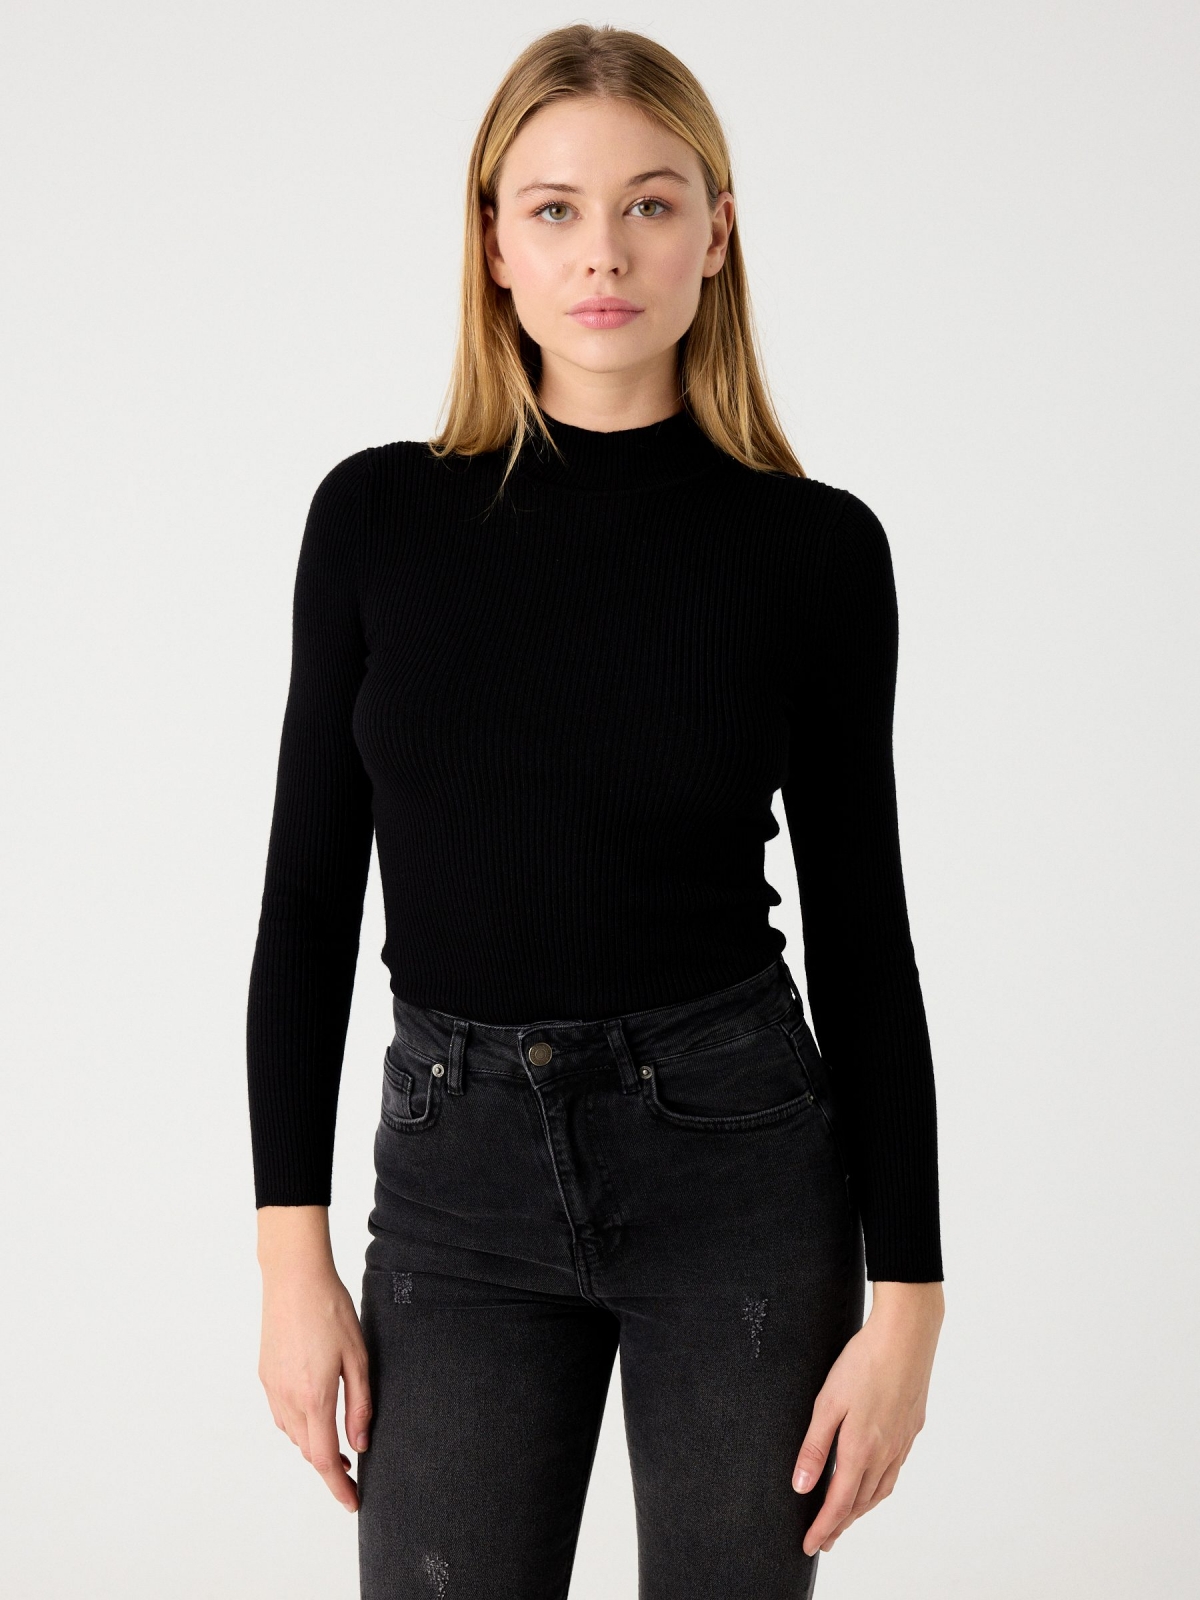 Black sweater with turtleneck black middle front view